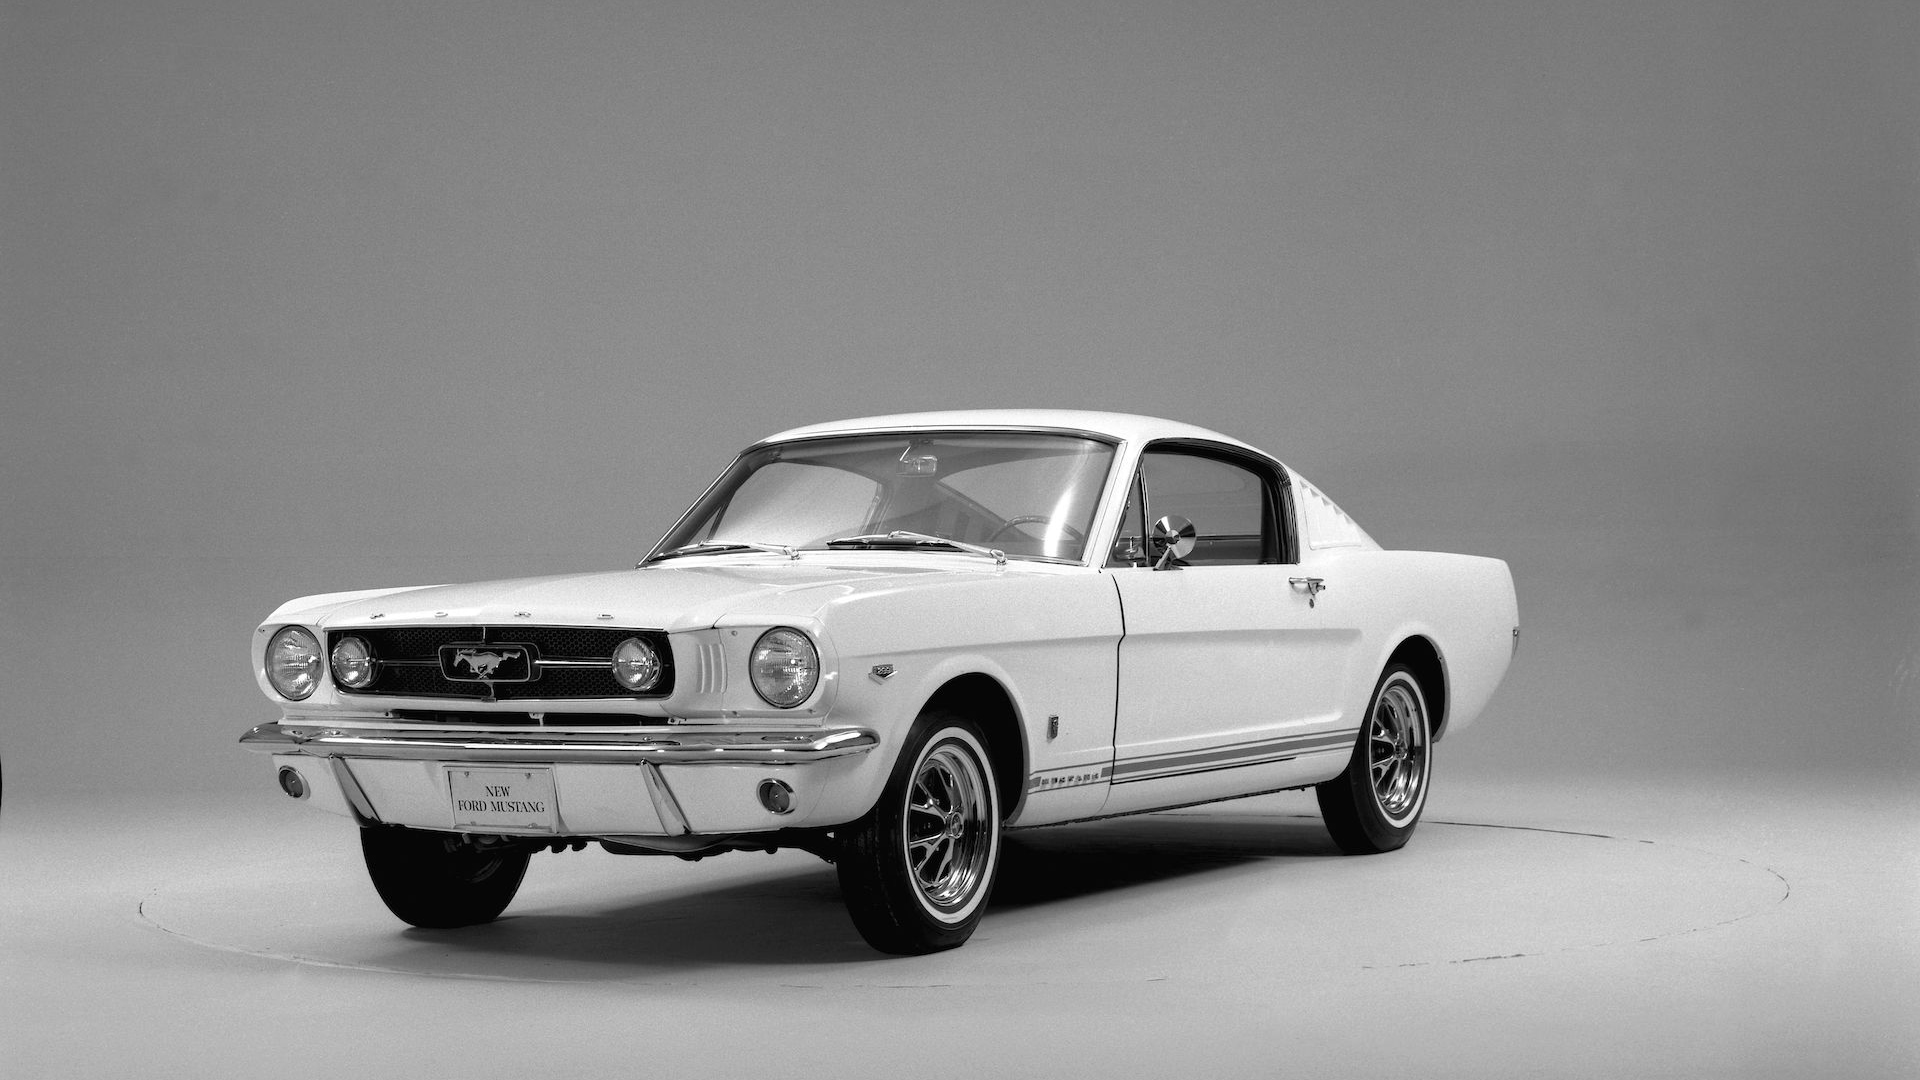 1965 Ford Mustang fastback with GT package